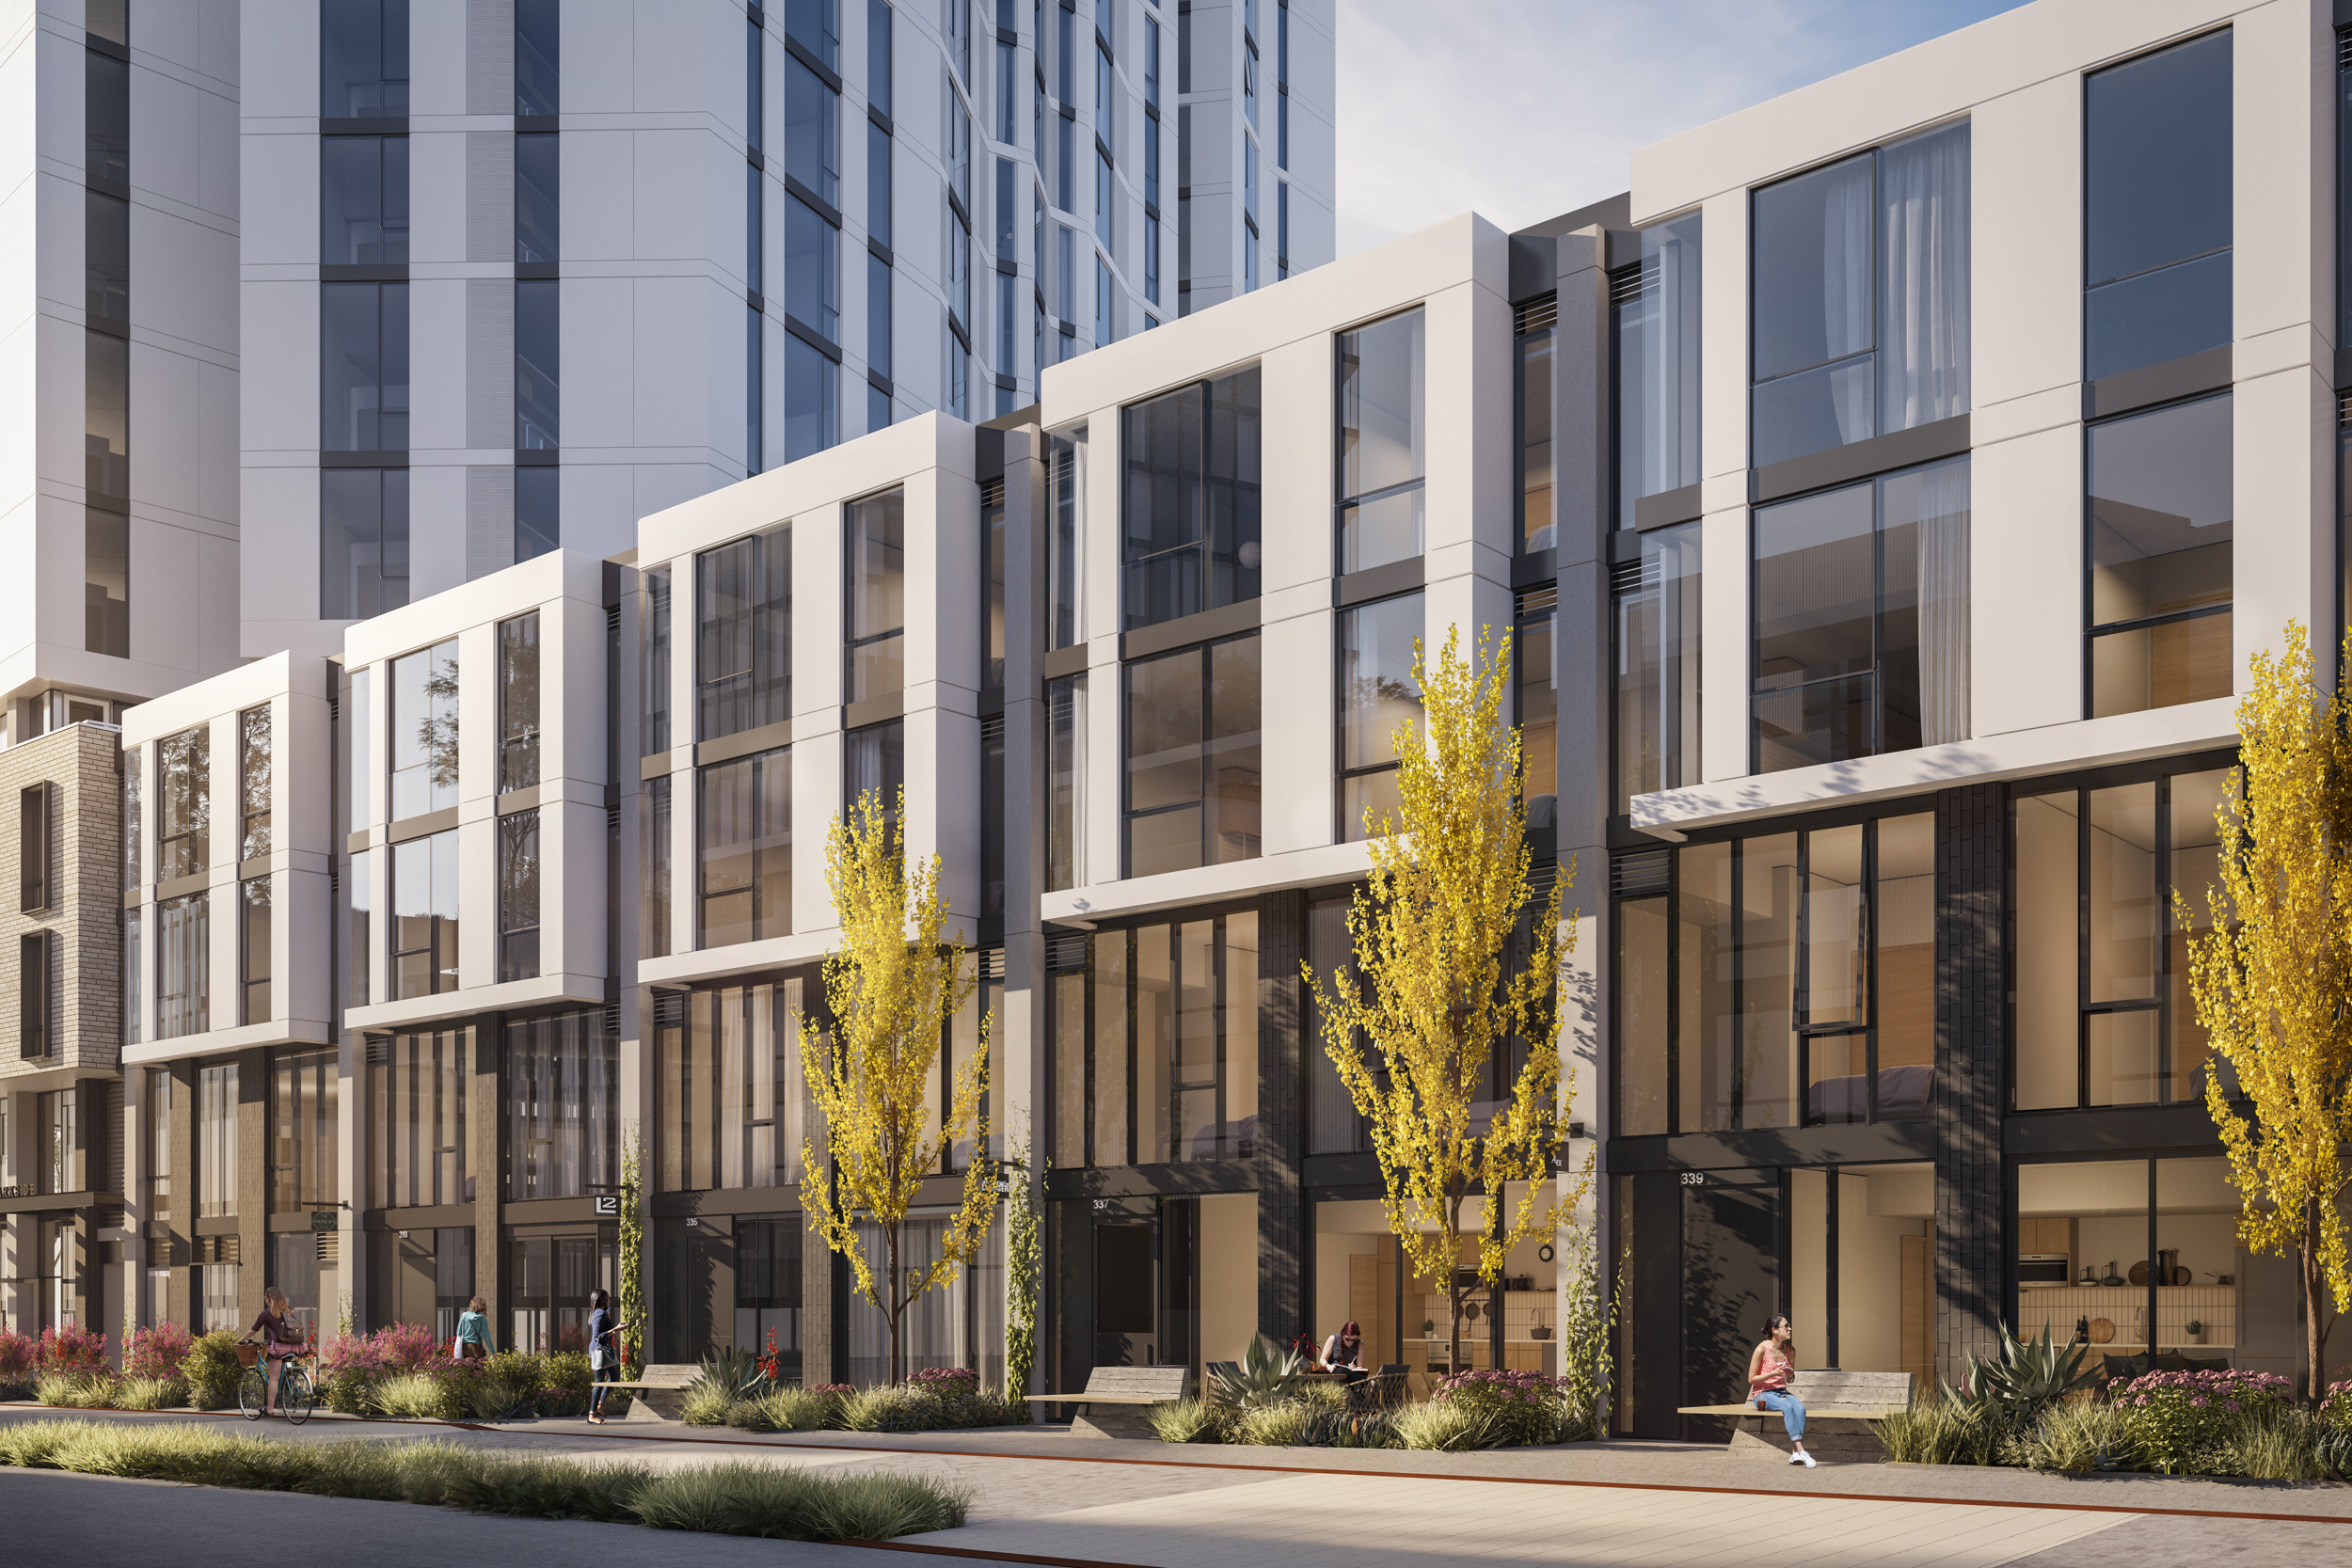 Tidal House podium apartments overlooking the CMG-designed shared public way, rendering by Hayes Davidson